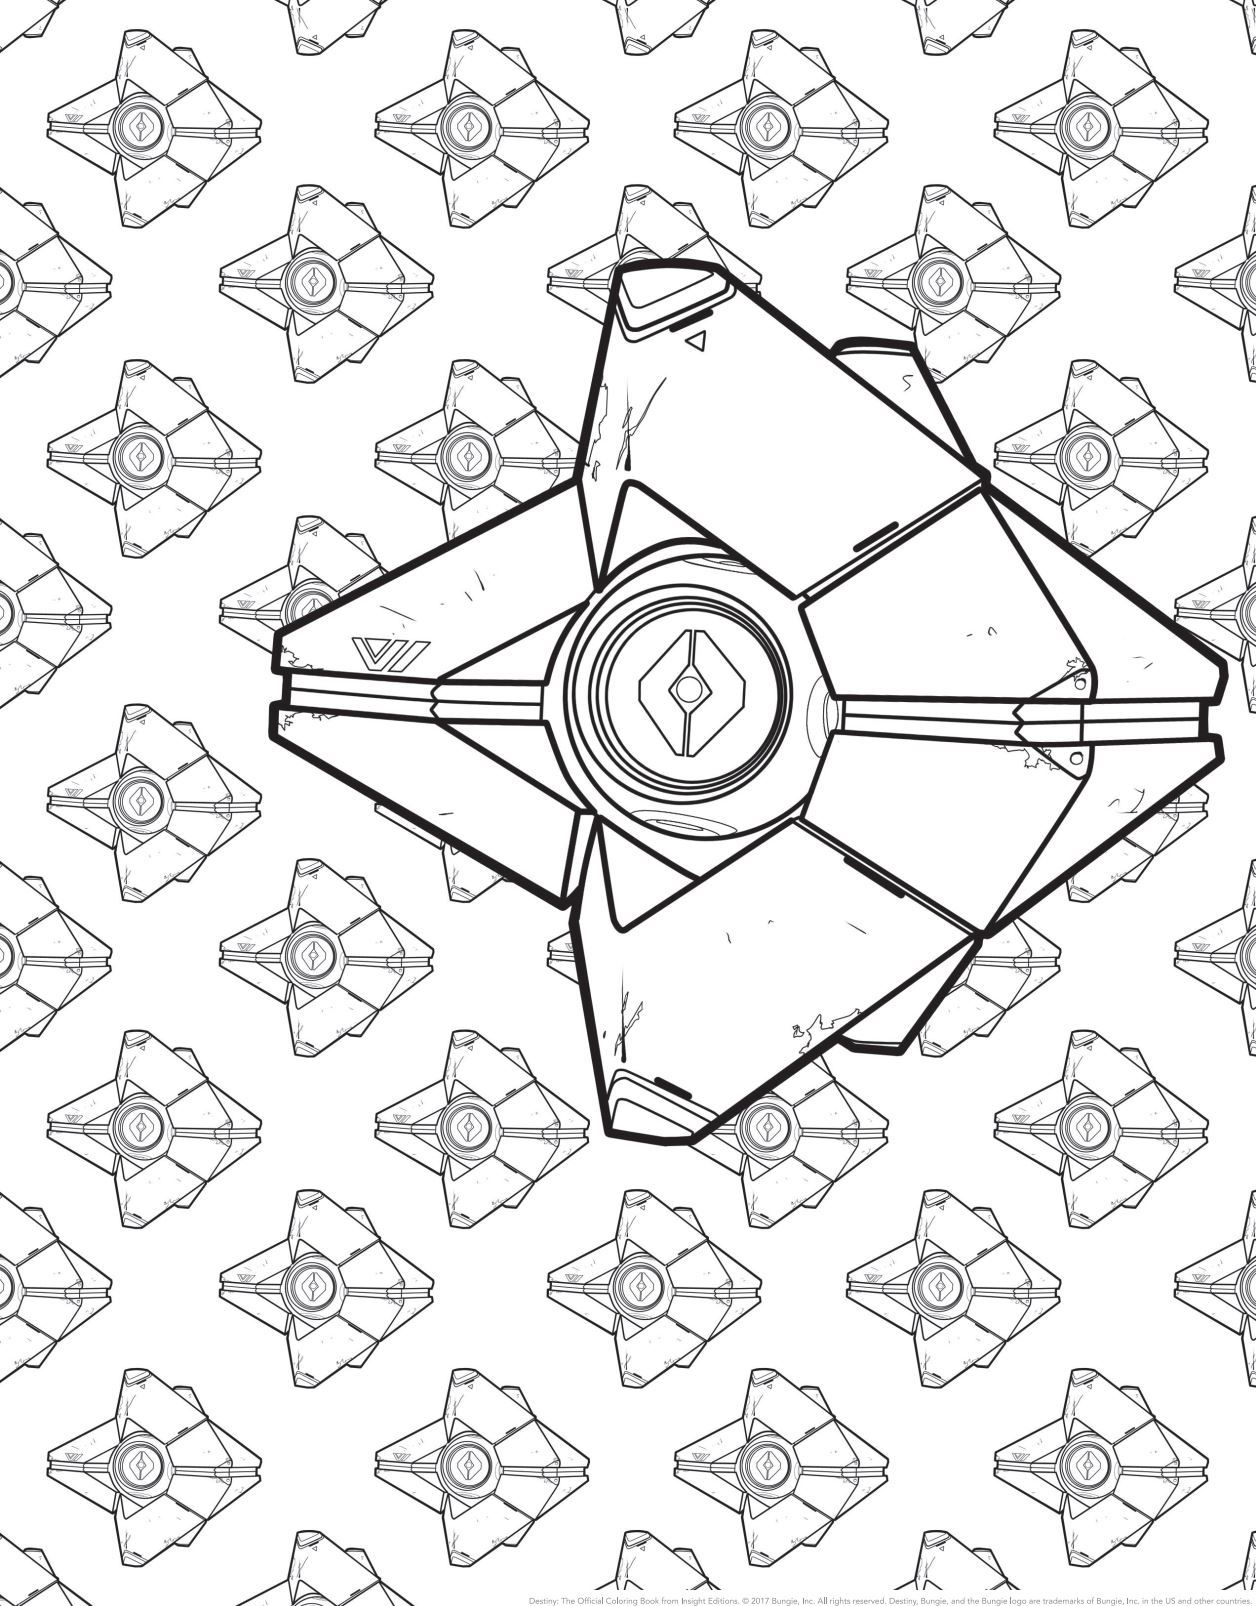 Ahead Of Destiny 2's Release, An Official Destiny Coloring Book Is ...